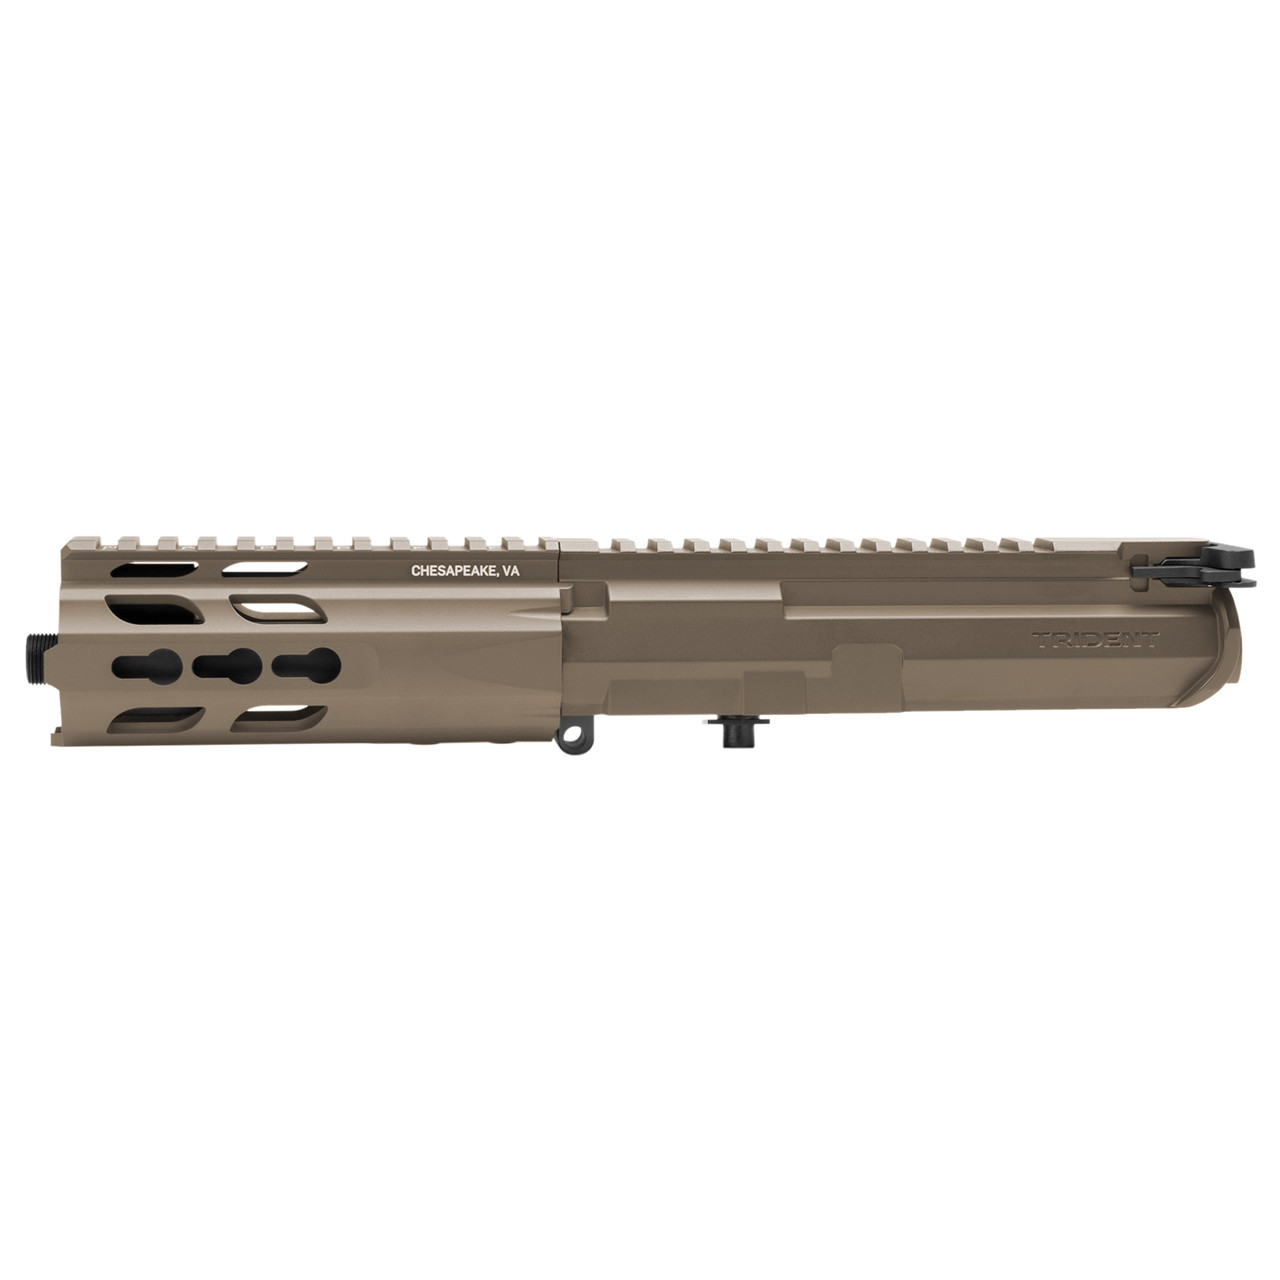 Shop Trident Mk2 PDW Upper Receiver Assembly / FDE - $ 200 - Krytac.com | For Airsoft Use Only.